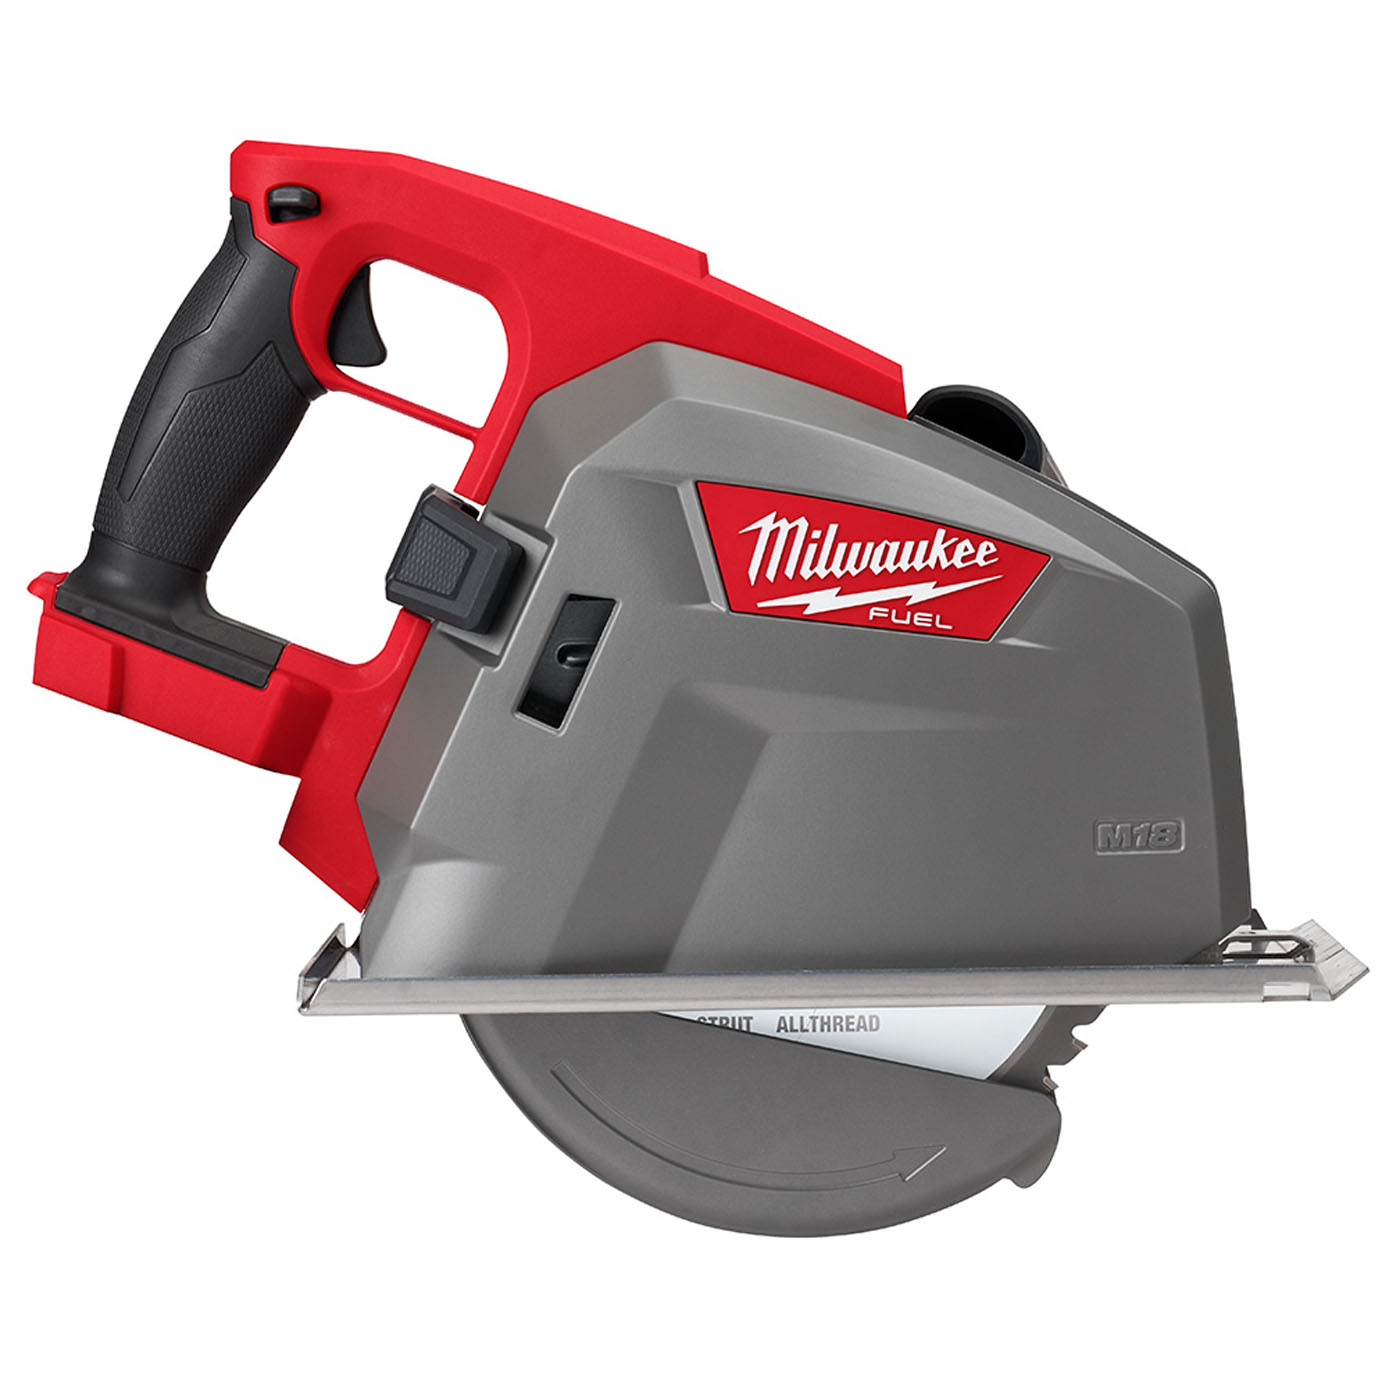 Milwaukee 2982 20 M18 Fuel 18 Volt Lithium Ion Brushless Cordless 8 In